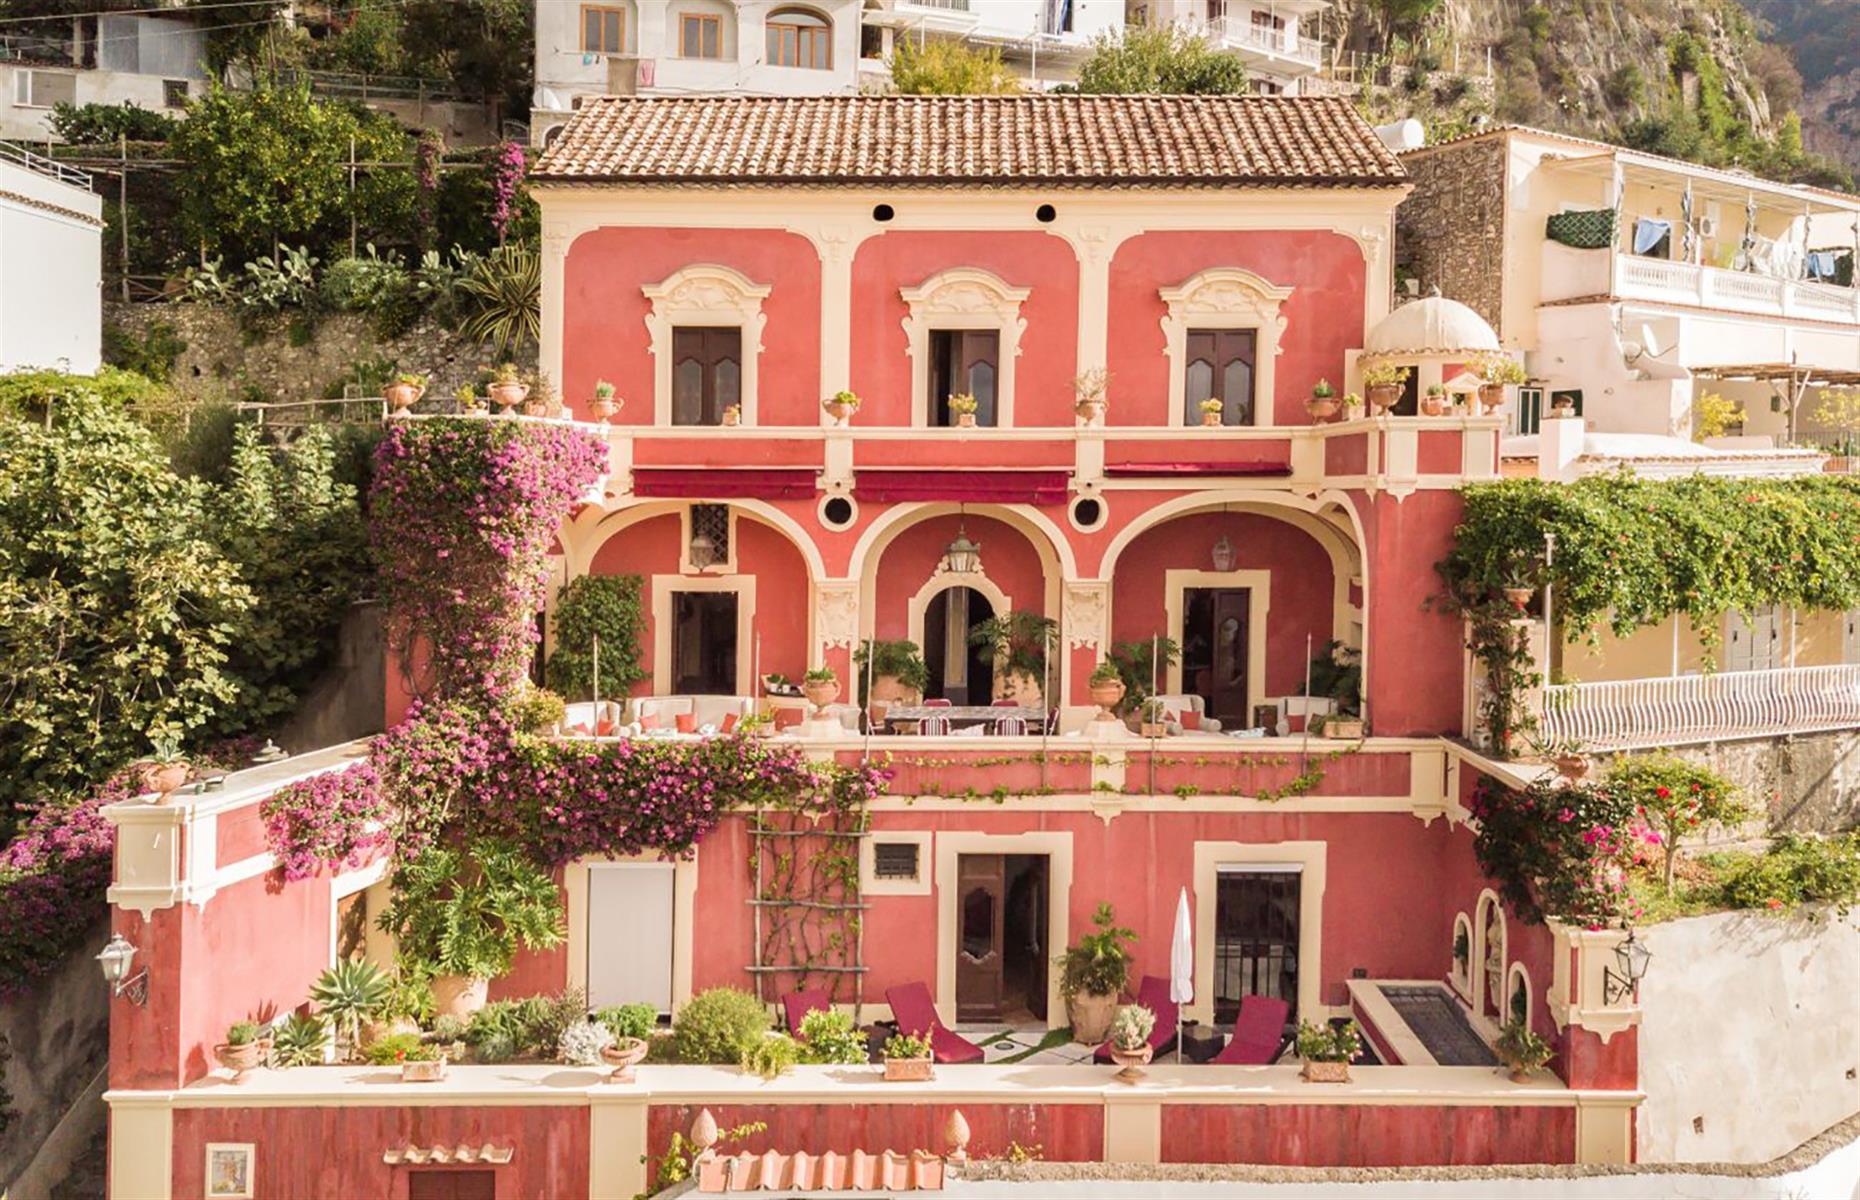 <p>Clinging to a clifftop in the picturesque Italian village of Positano, <a href="https://www.airbnb.co.uk/luxury/listing/26202370">Villa Dorata</a> is a vision in pink. The dreamy four-bedroom villa is surrounded by fragrant citrus trees and overlooks the rugged Mediterranean coastline. The Baroque-style home has ornate fresco ceilings, tiled floors and even a private spa with a Turkish steam bath.</p>